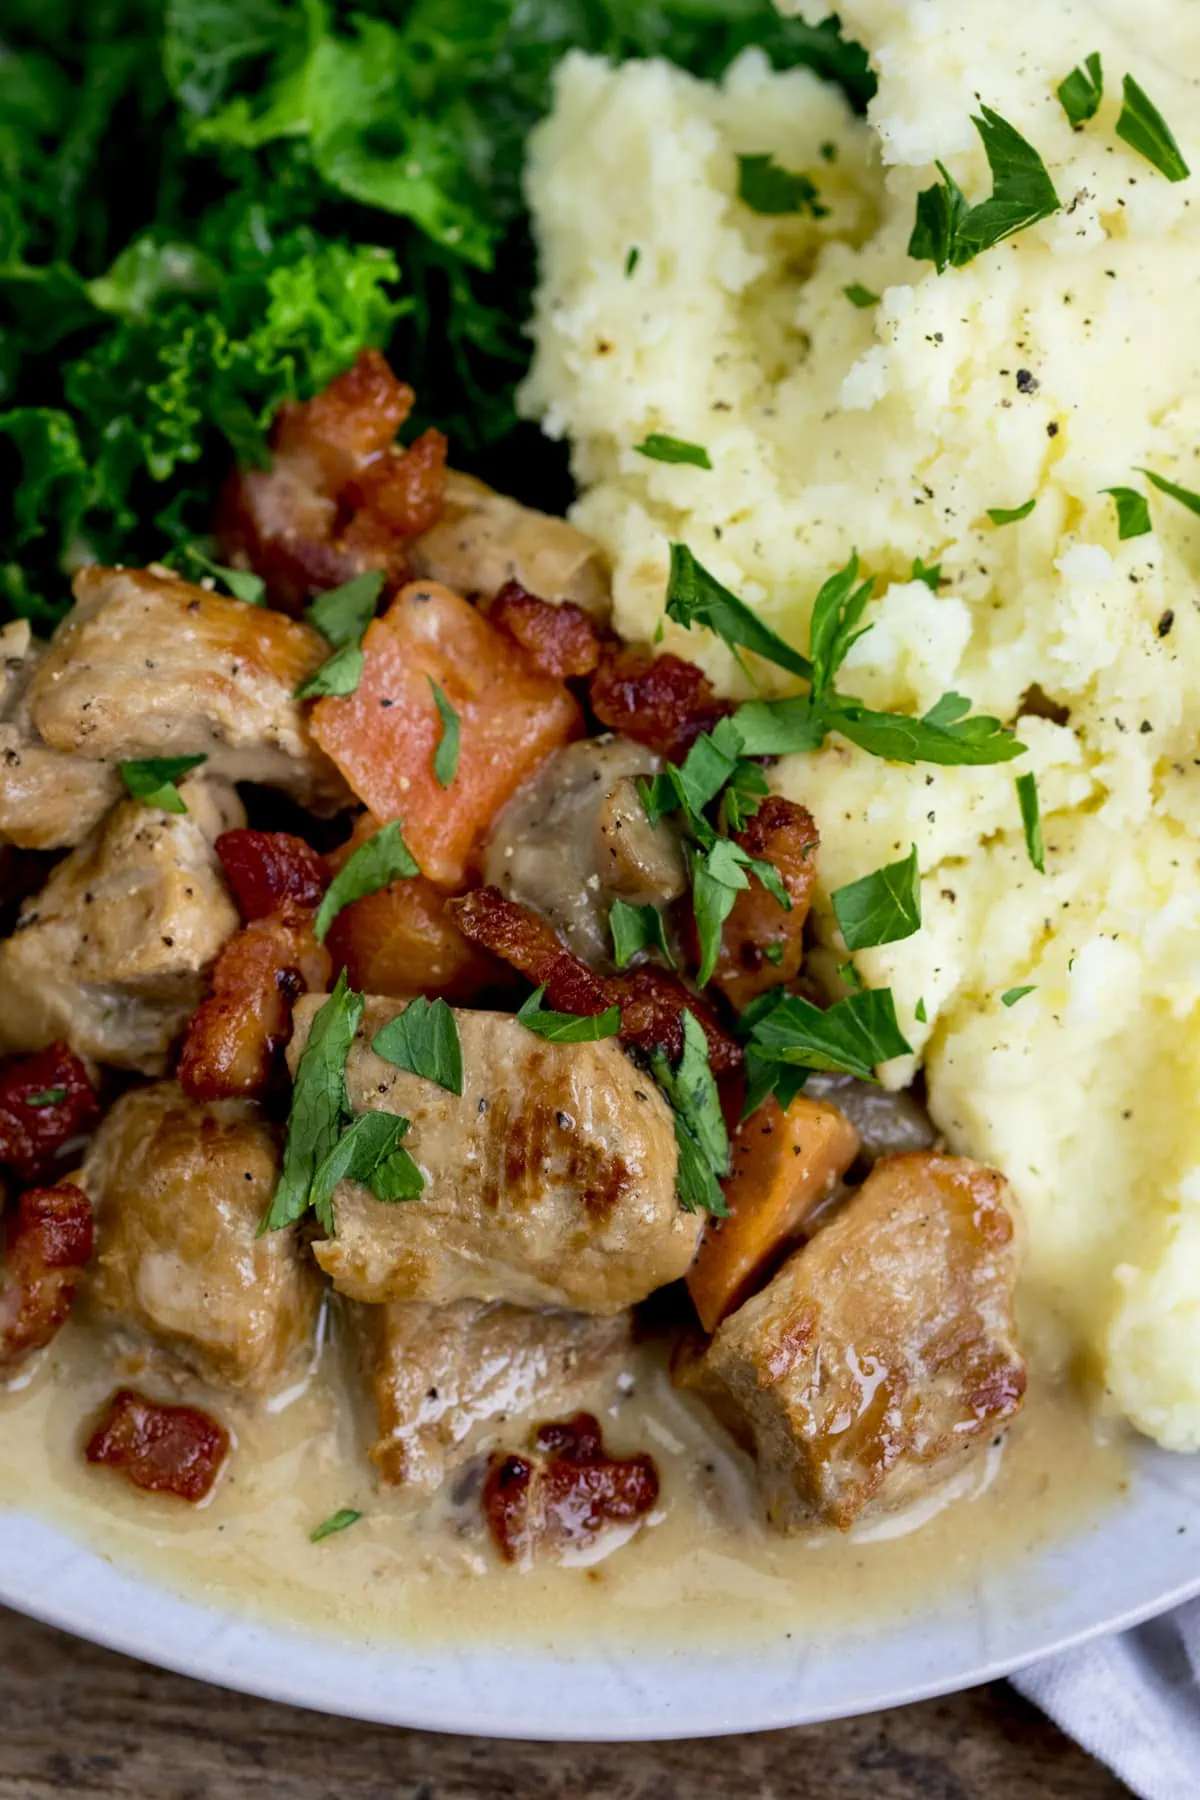 Close-up overhead image of cream pork casserole with bacon, carrot and mushroom on a light plate with mashed potato and kale. Parsley has been sprinkled on top.